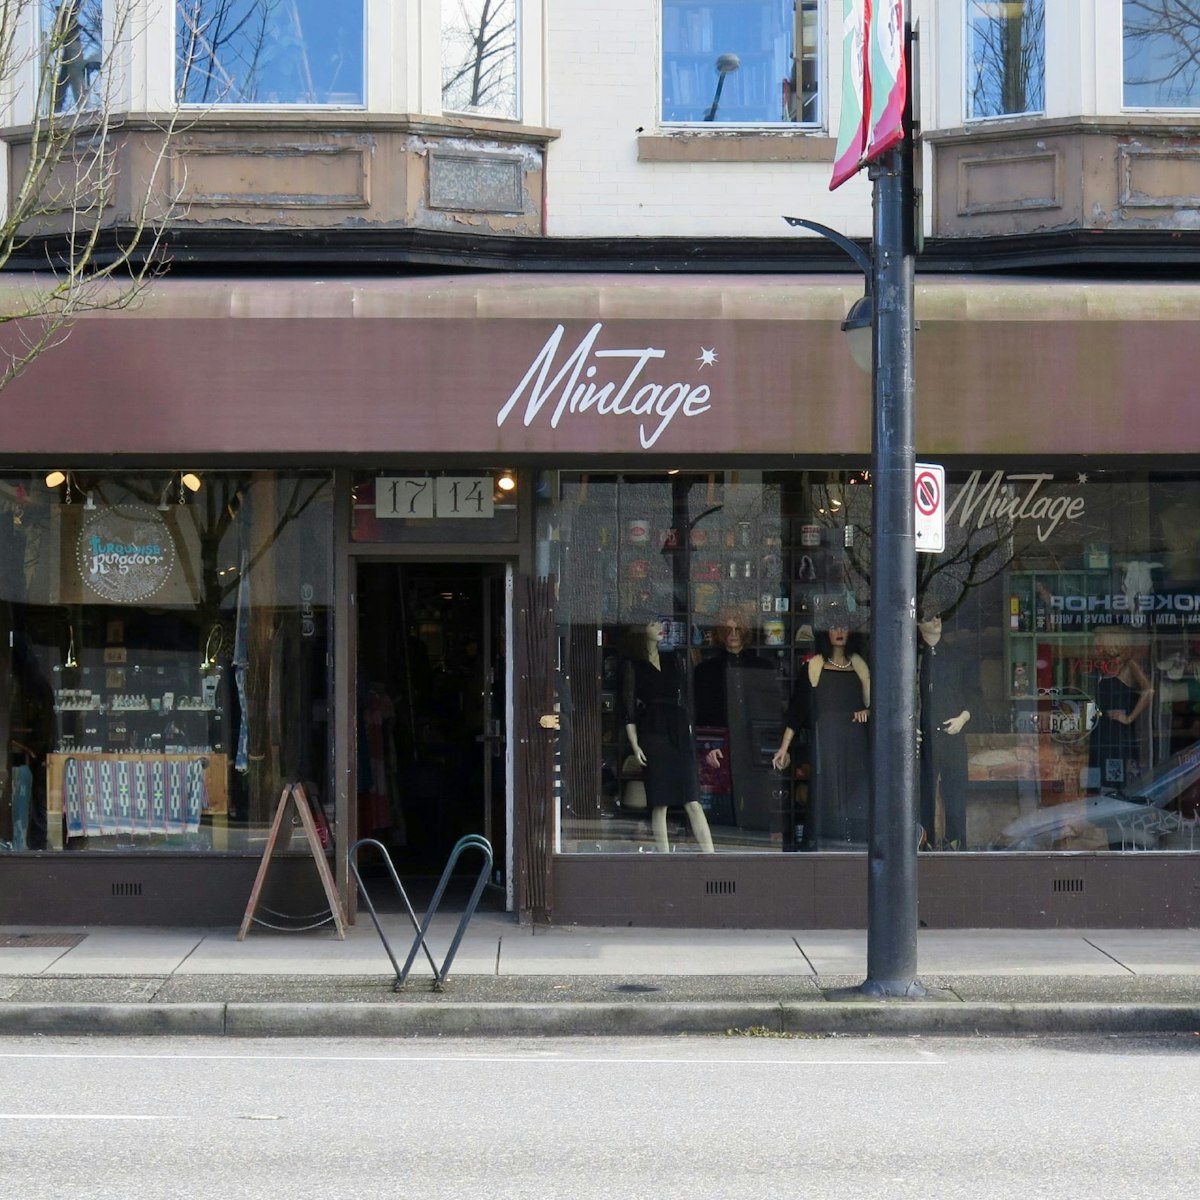 Exterior of Mintage vintage clothing store